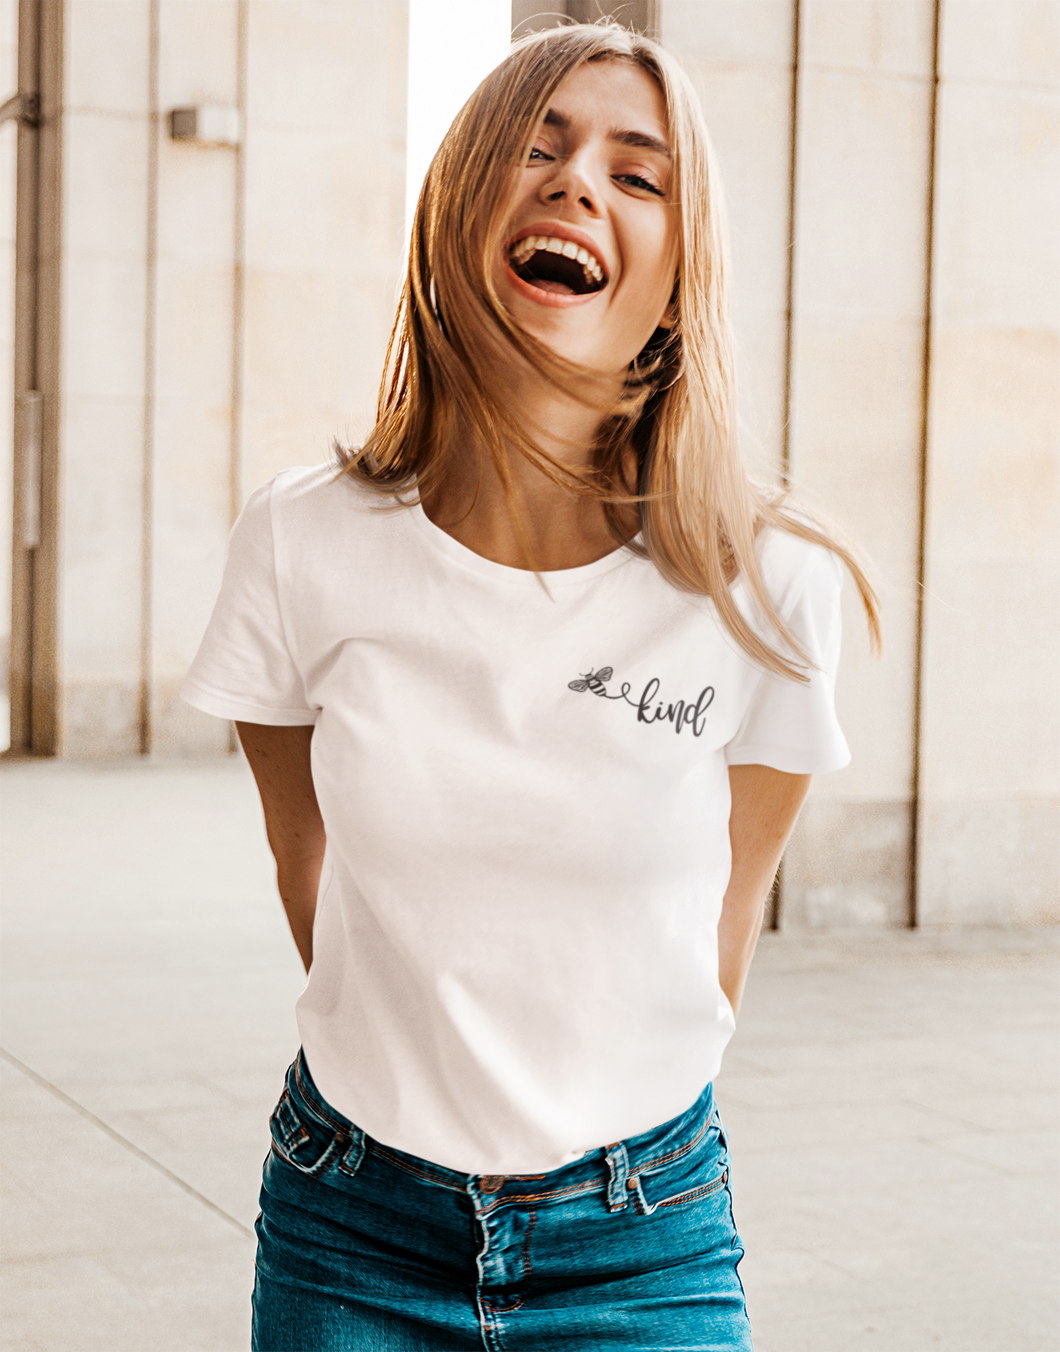 Woman wearing white t-shirt with a picture of a bumble bee and the word kind.